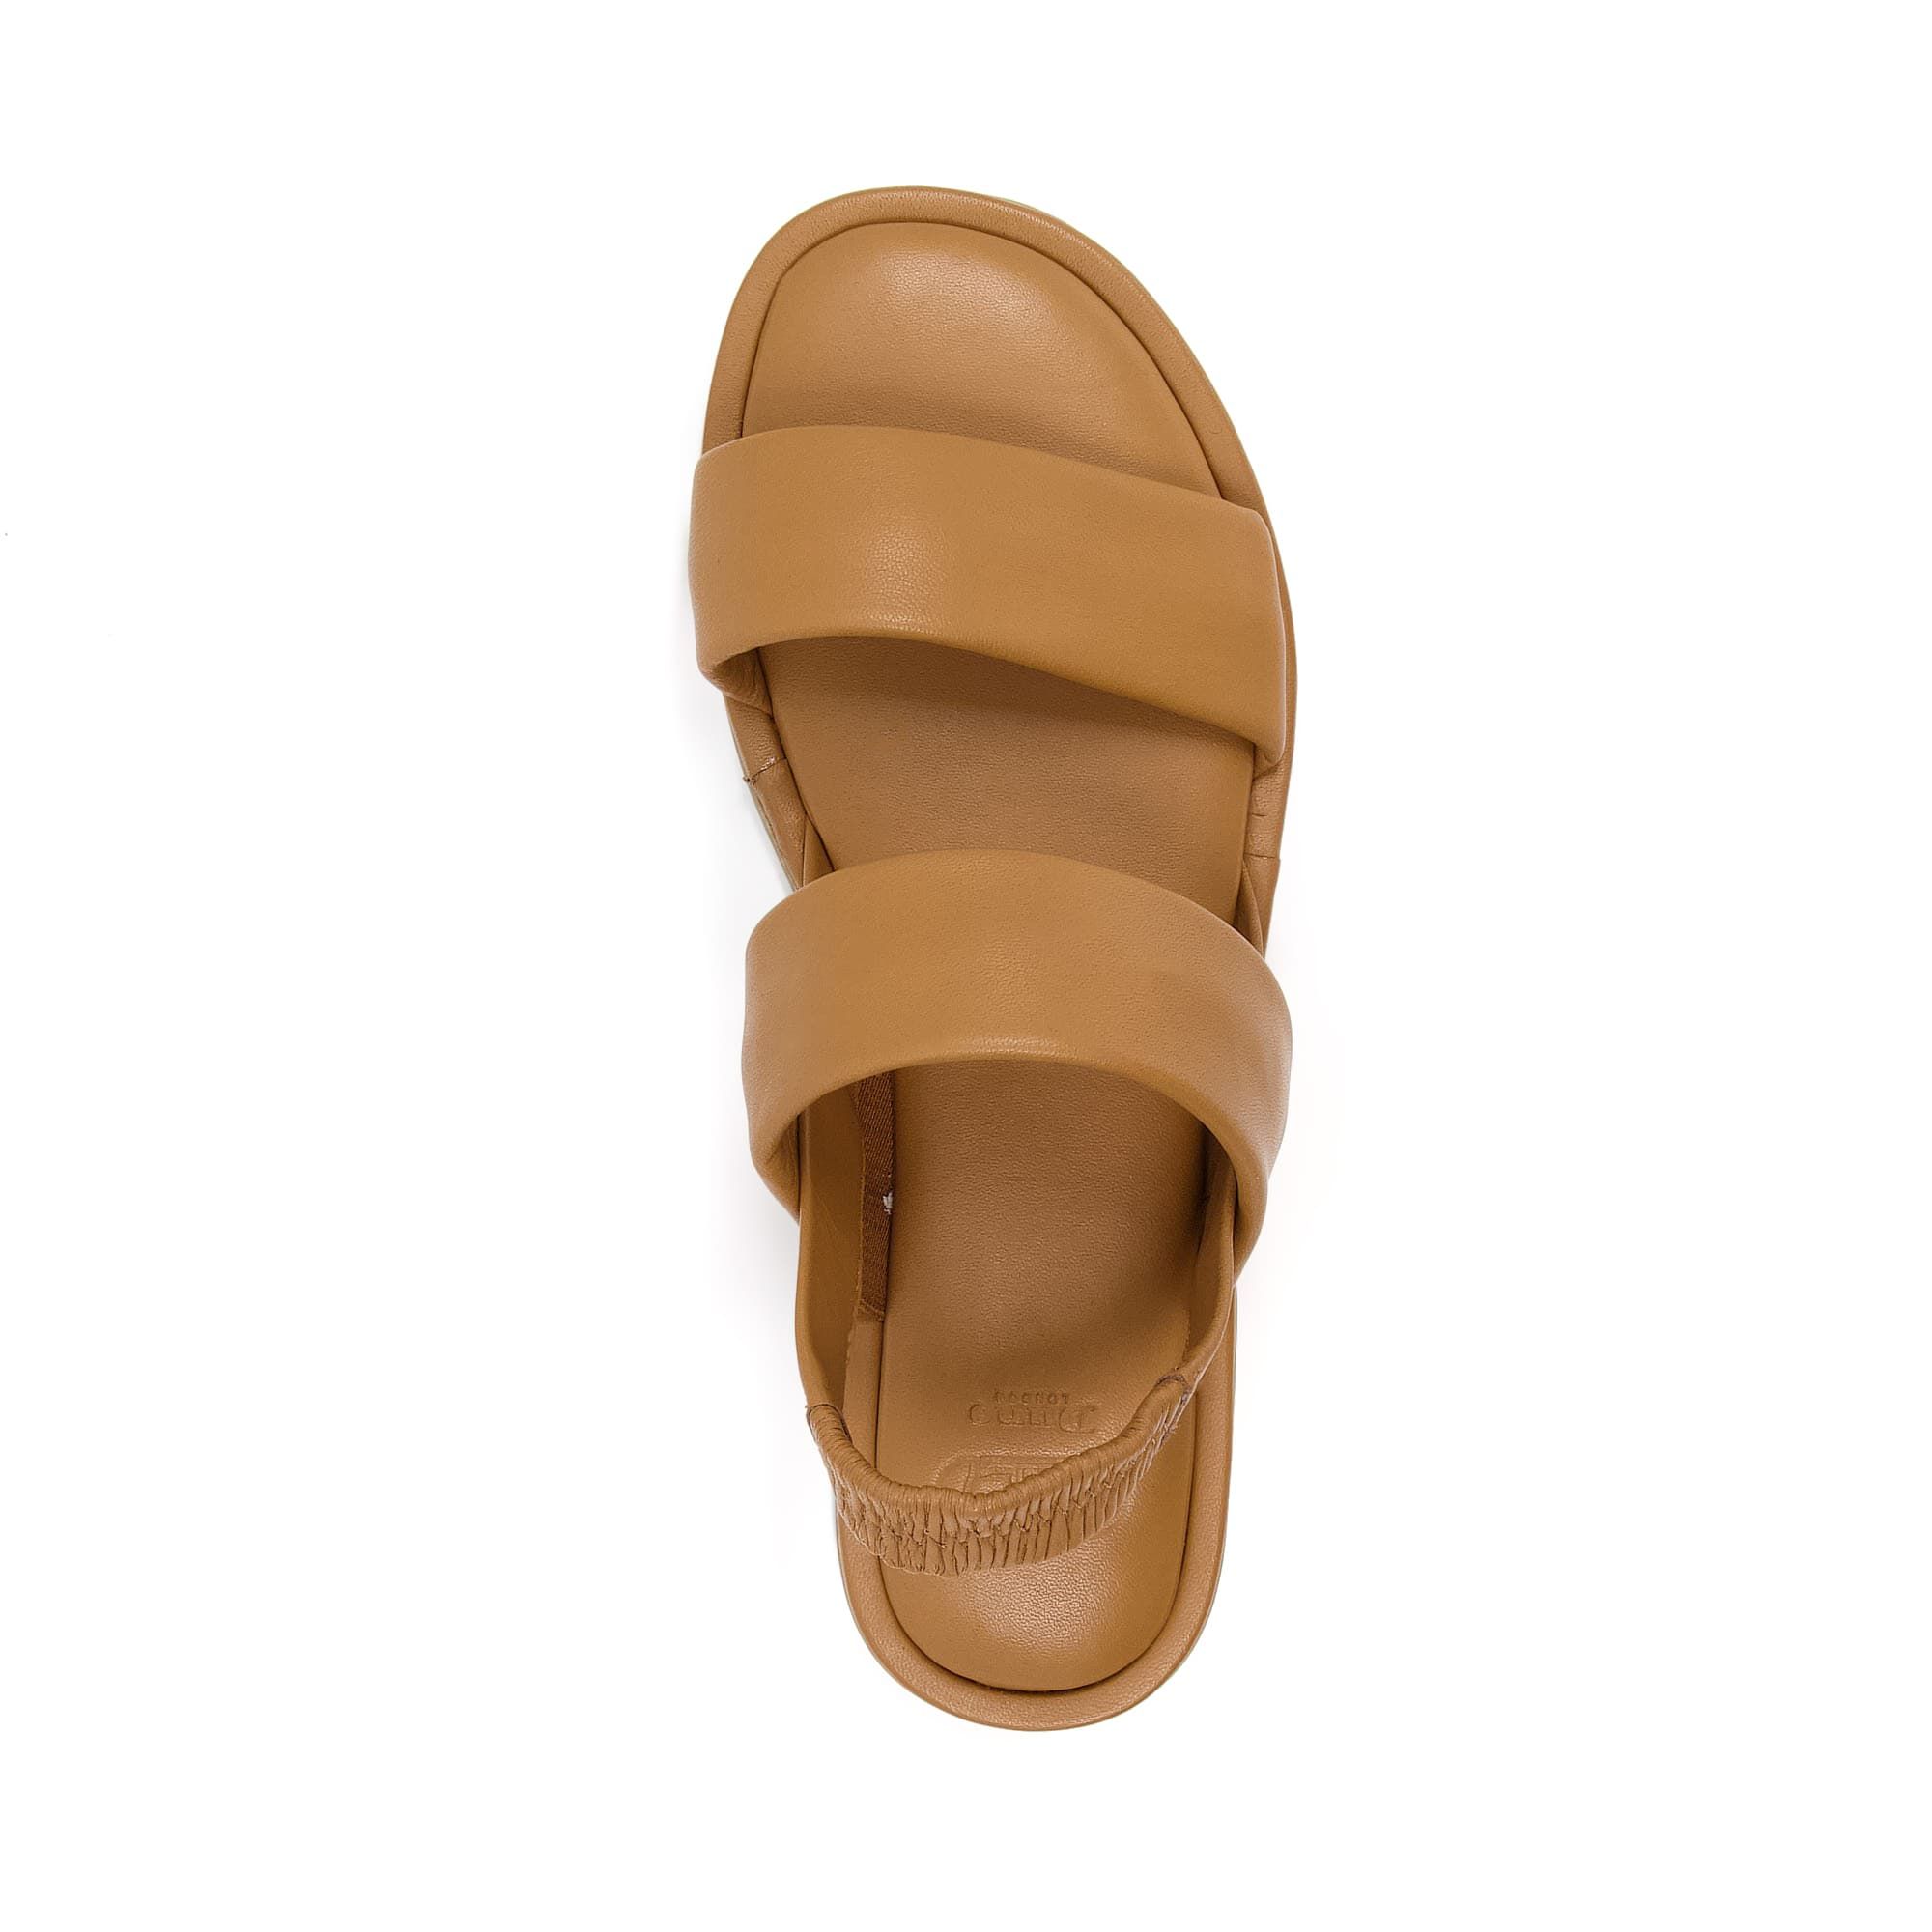 Meet the sandals you'll be living in this summer. Comfortable and stylish, they feature soft leather straps, padded footbeds and elasticated inserts.